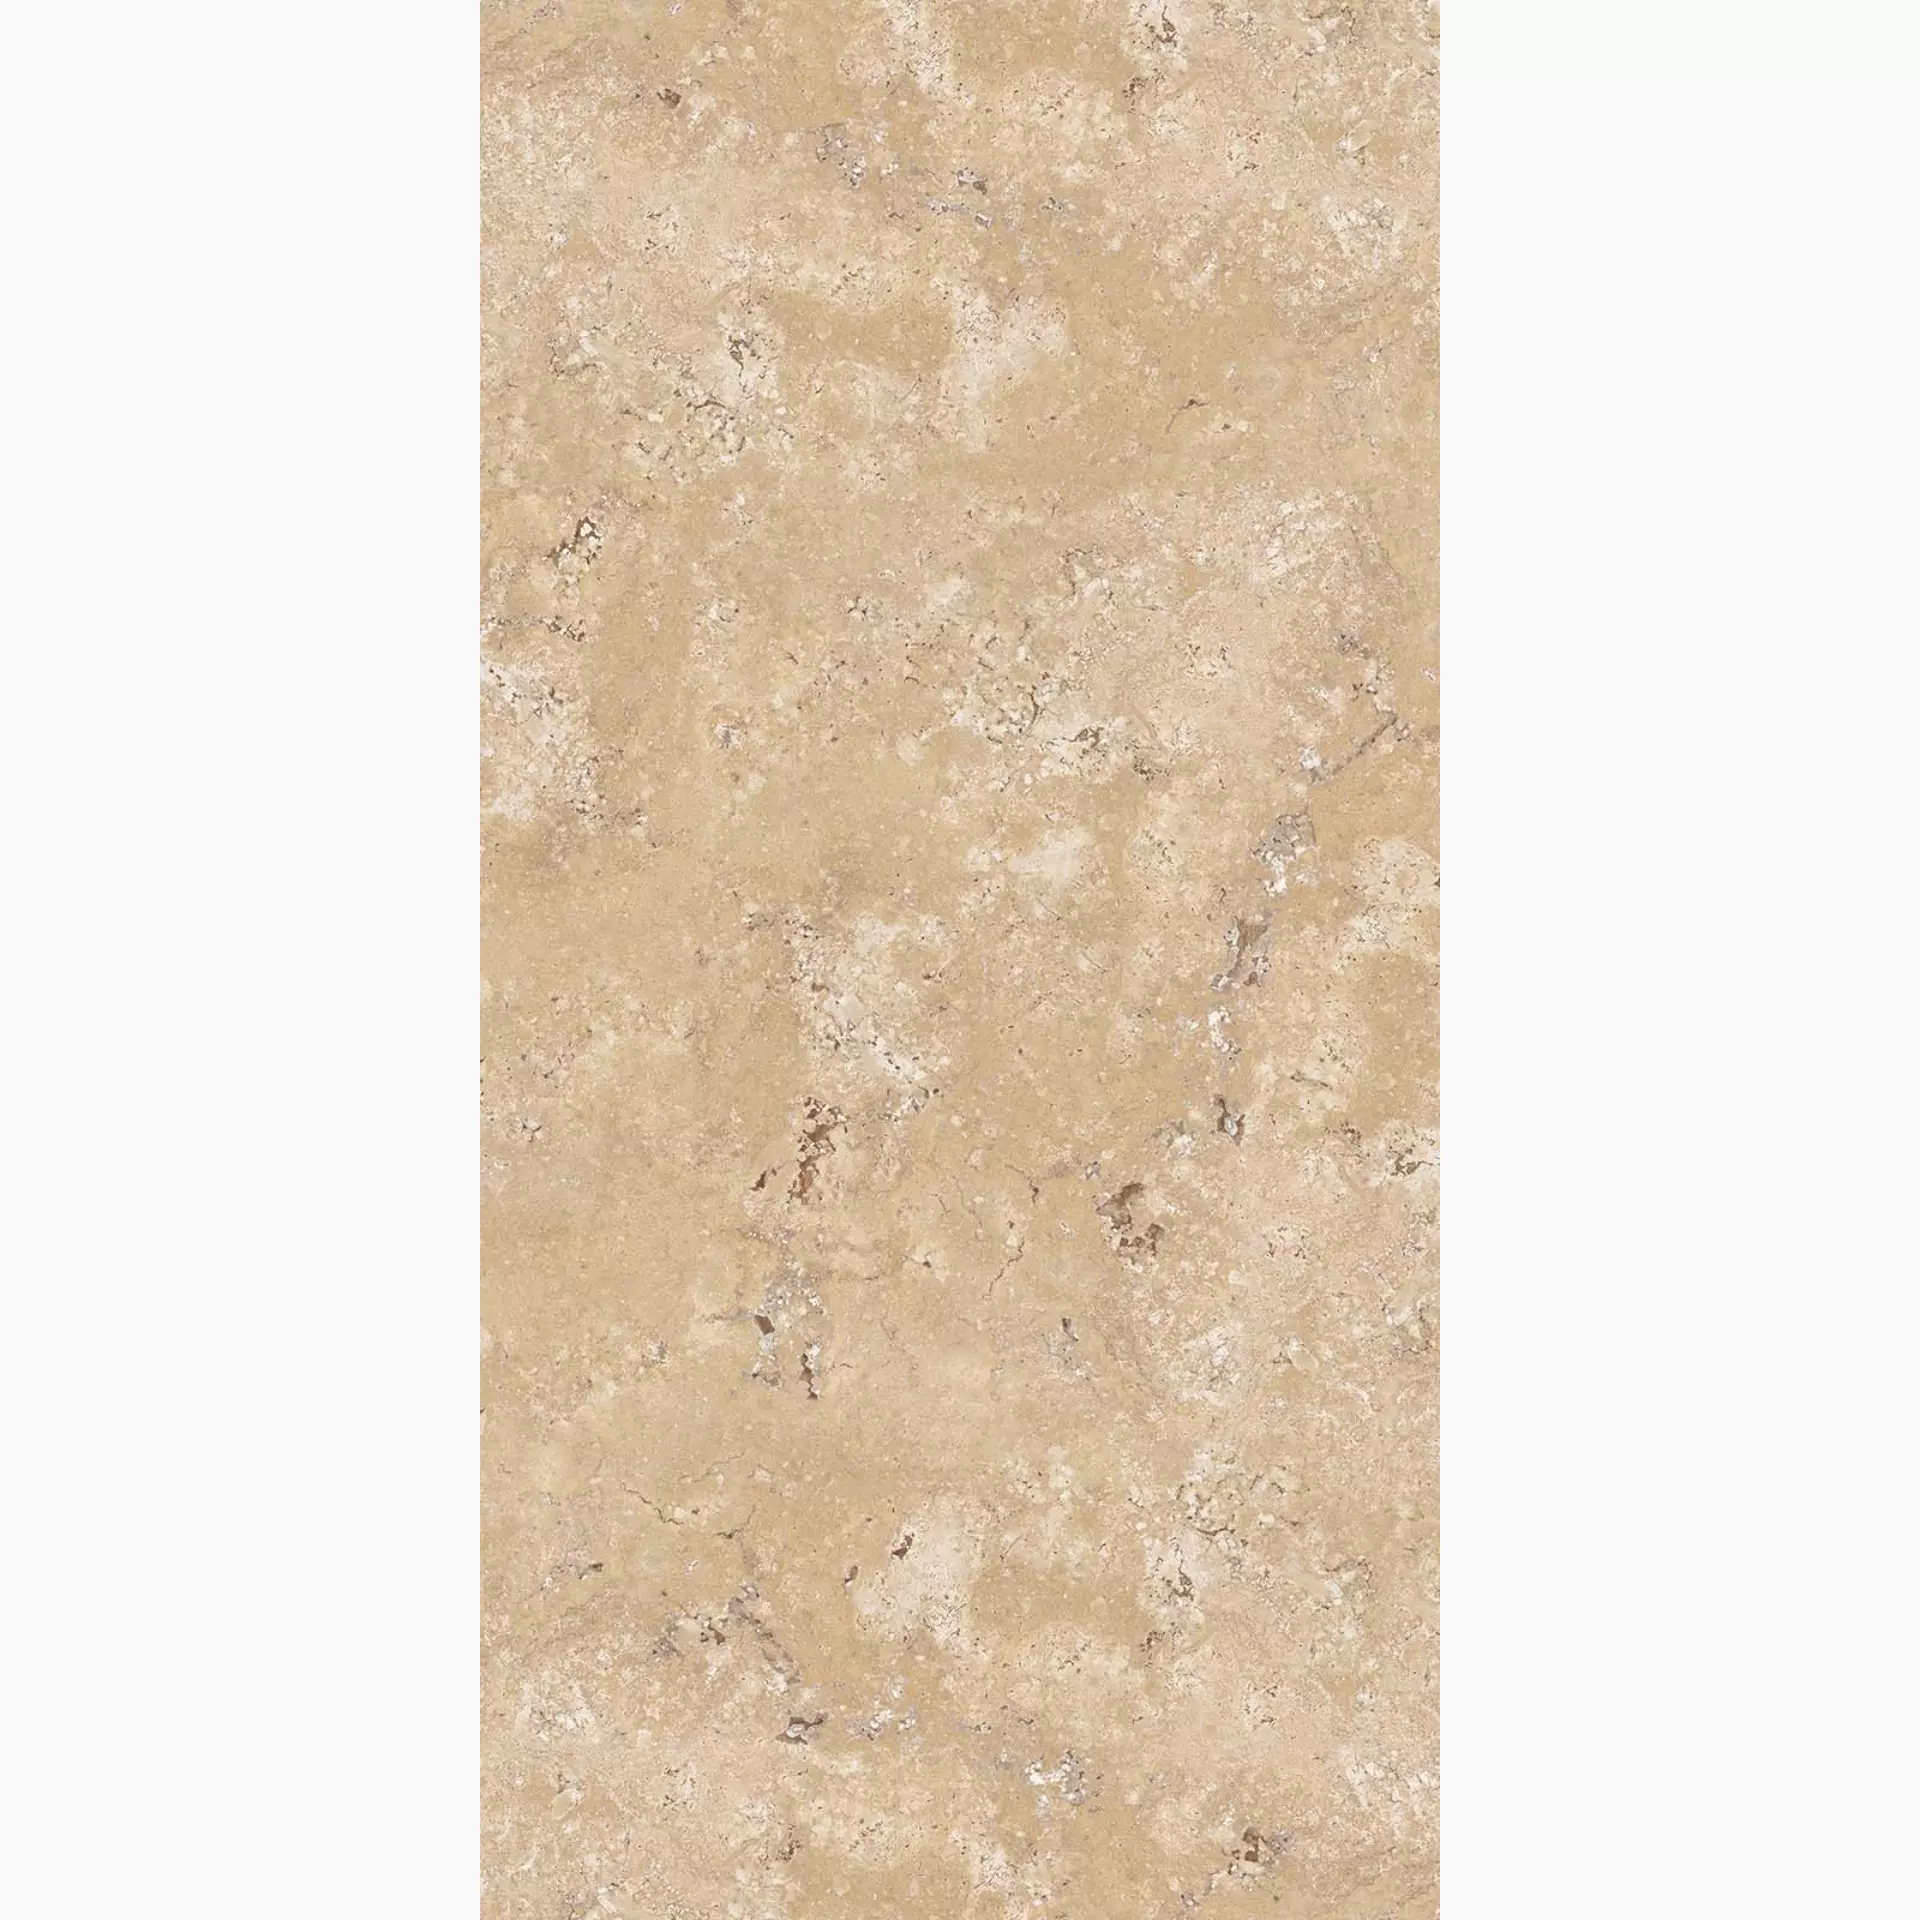 Keope Percorsi Frame Travertino Beige Spazzolato 474A3544 60x120cm rectified 9mm